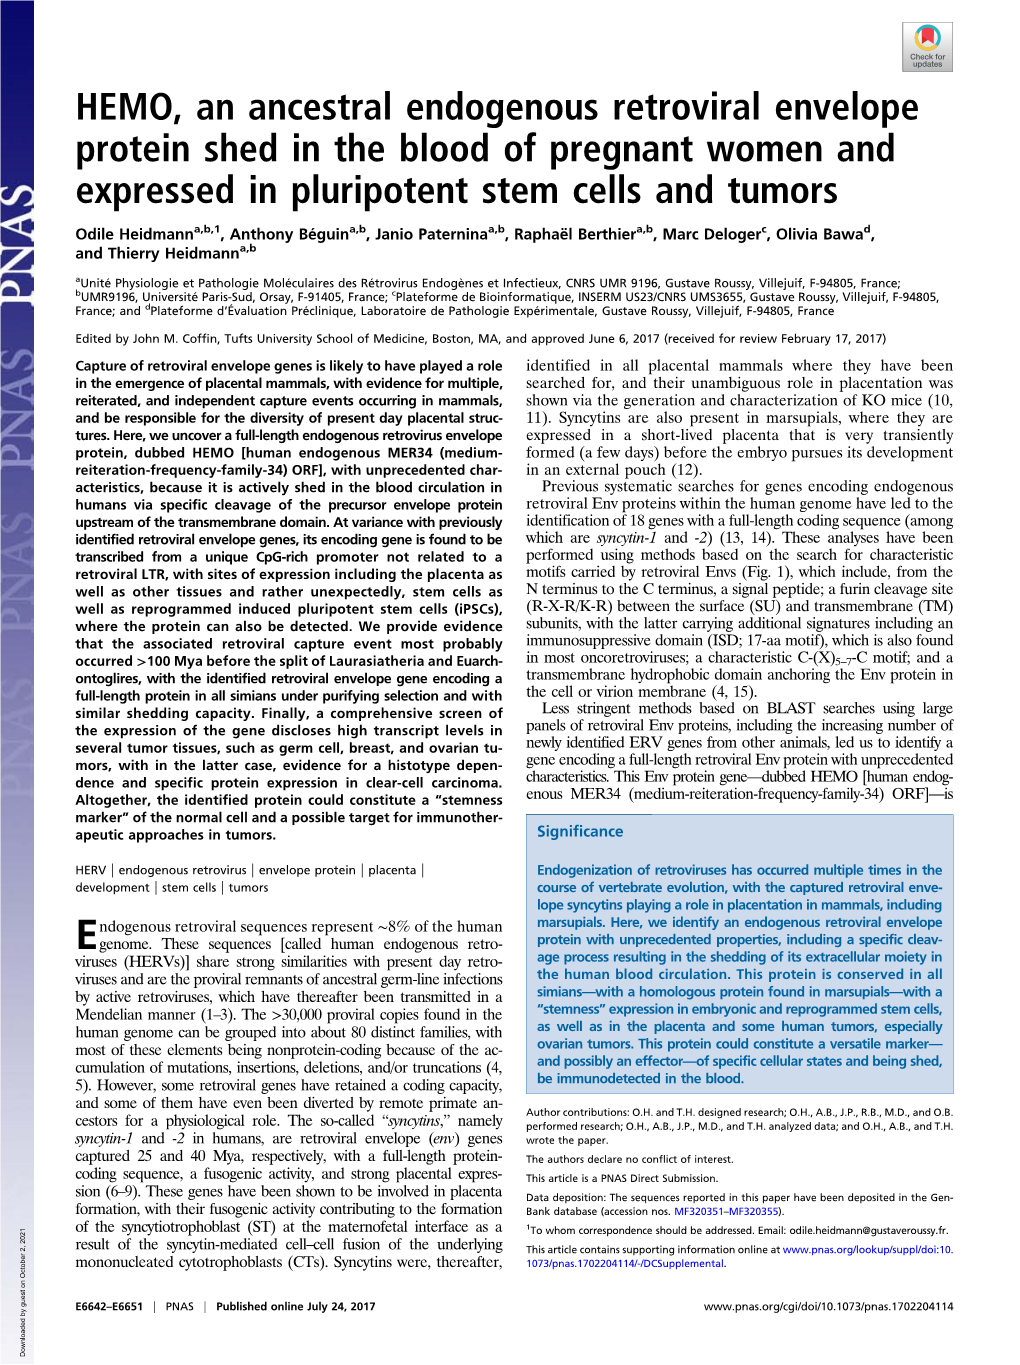 HEMO, an Ancestral Endogenous Retroviral Envelope Protein Shed in the Blood of Pregnant Women and Expressed in Pluripotent Stem Cells and Tumors